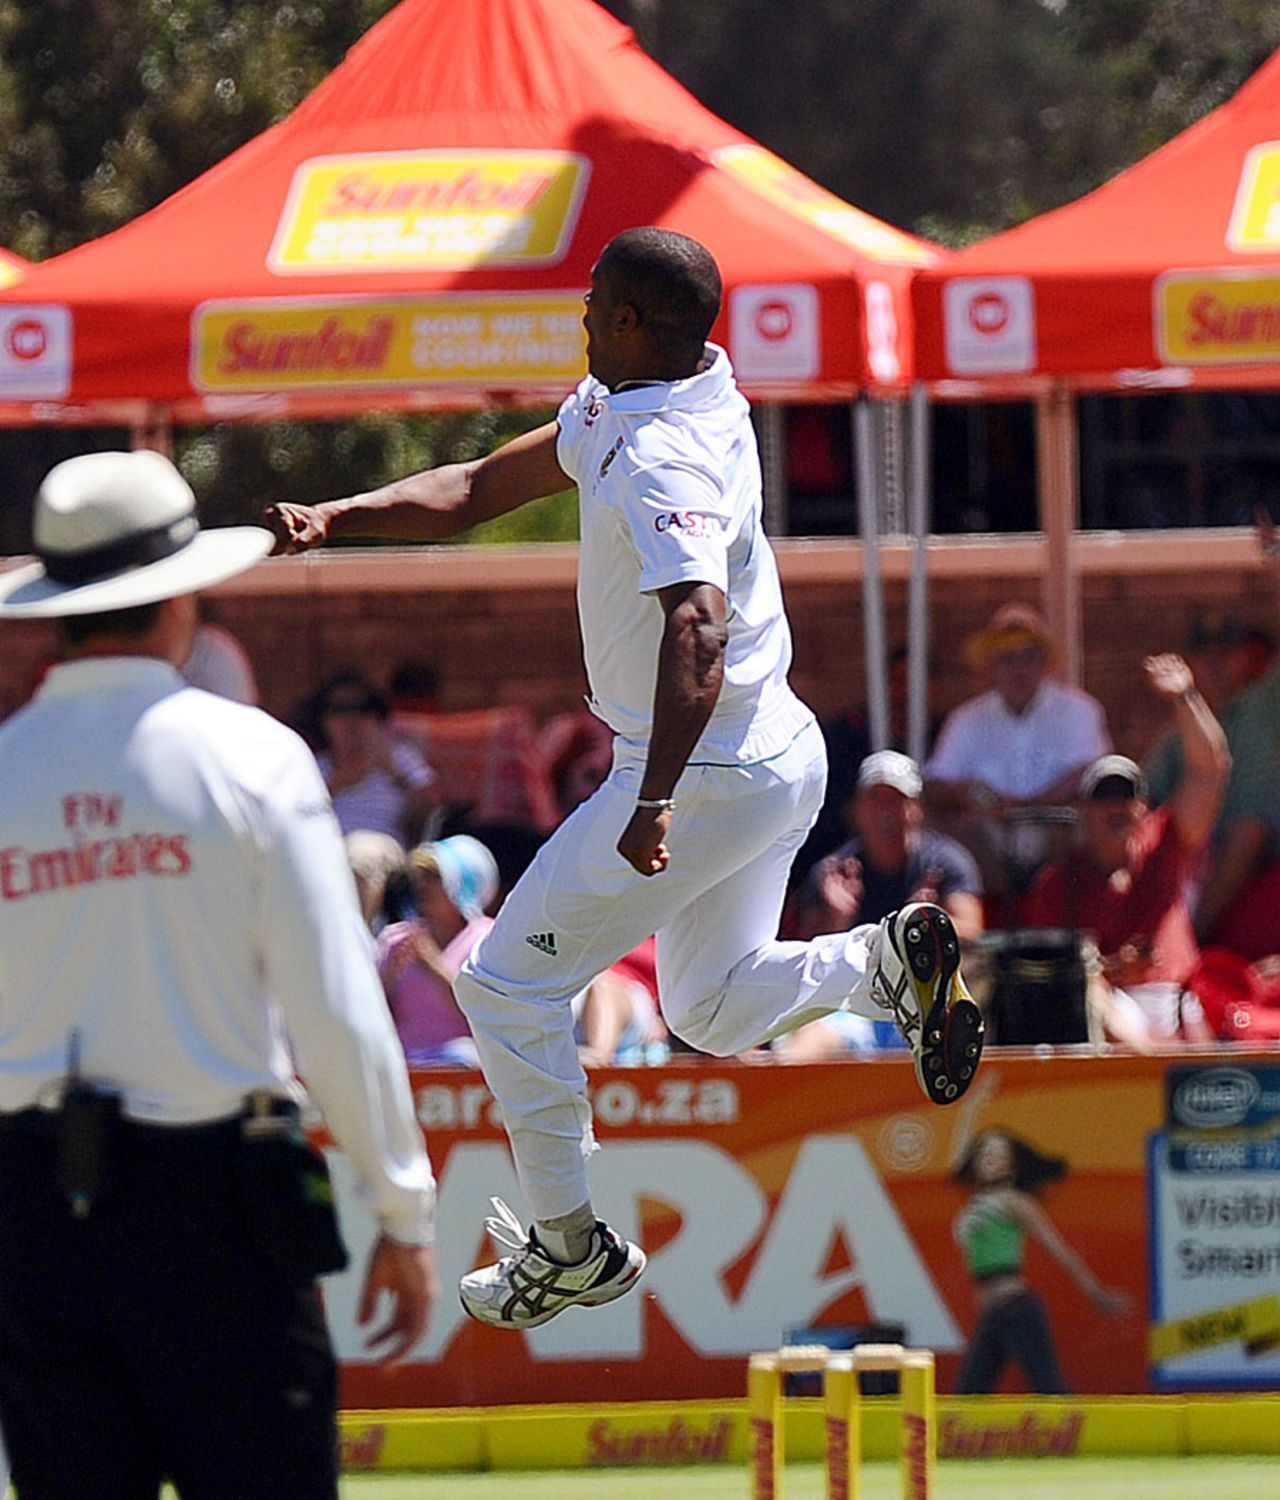 Vernon Philander is pumped up after a wicket, South Africa v New Zealand, 1st Test, Cape Town, 1st day, January 2, 2013